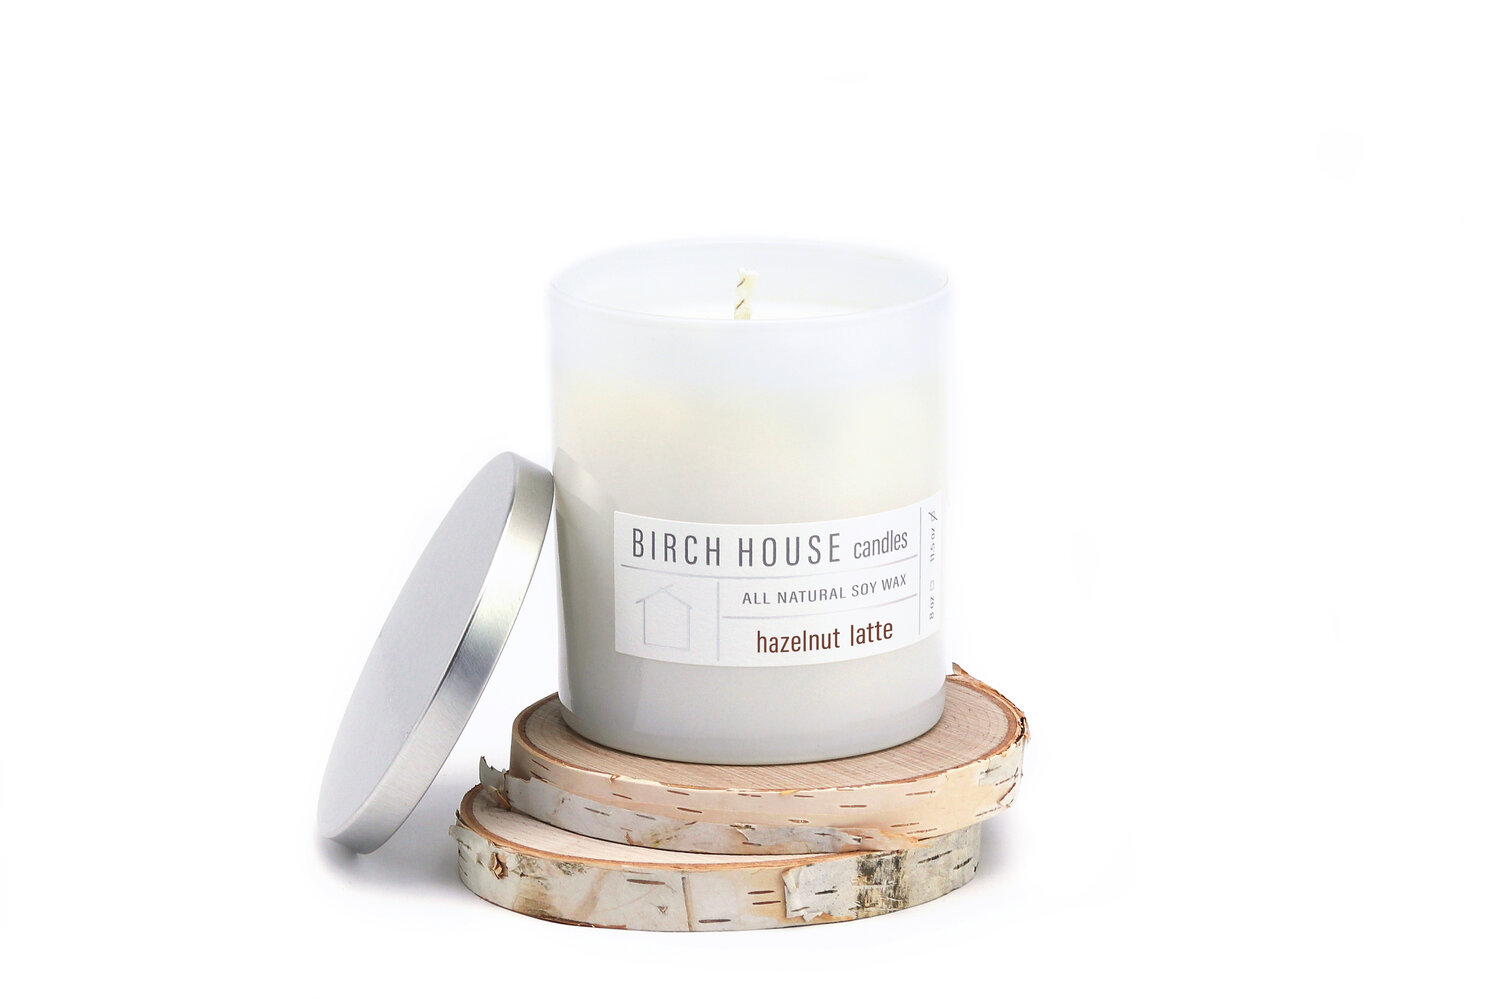 Gorgeous scent stories hand-poured in 100% soy wax candles. Indulgent  experiences for daily living. — BirchHouse Candles